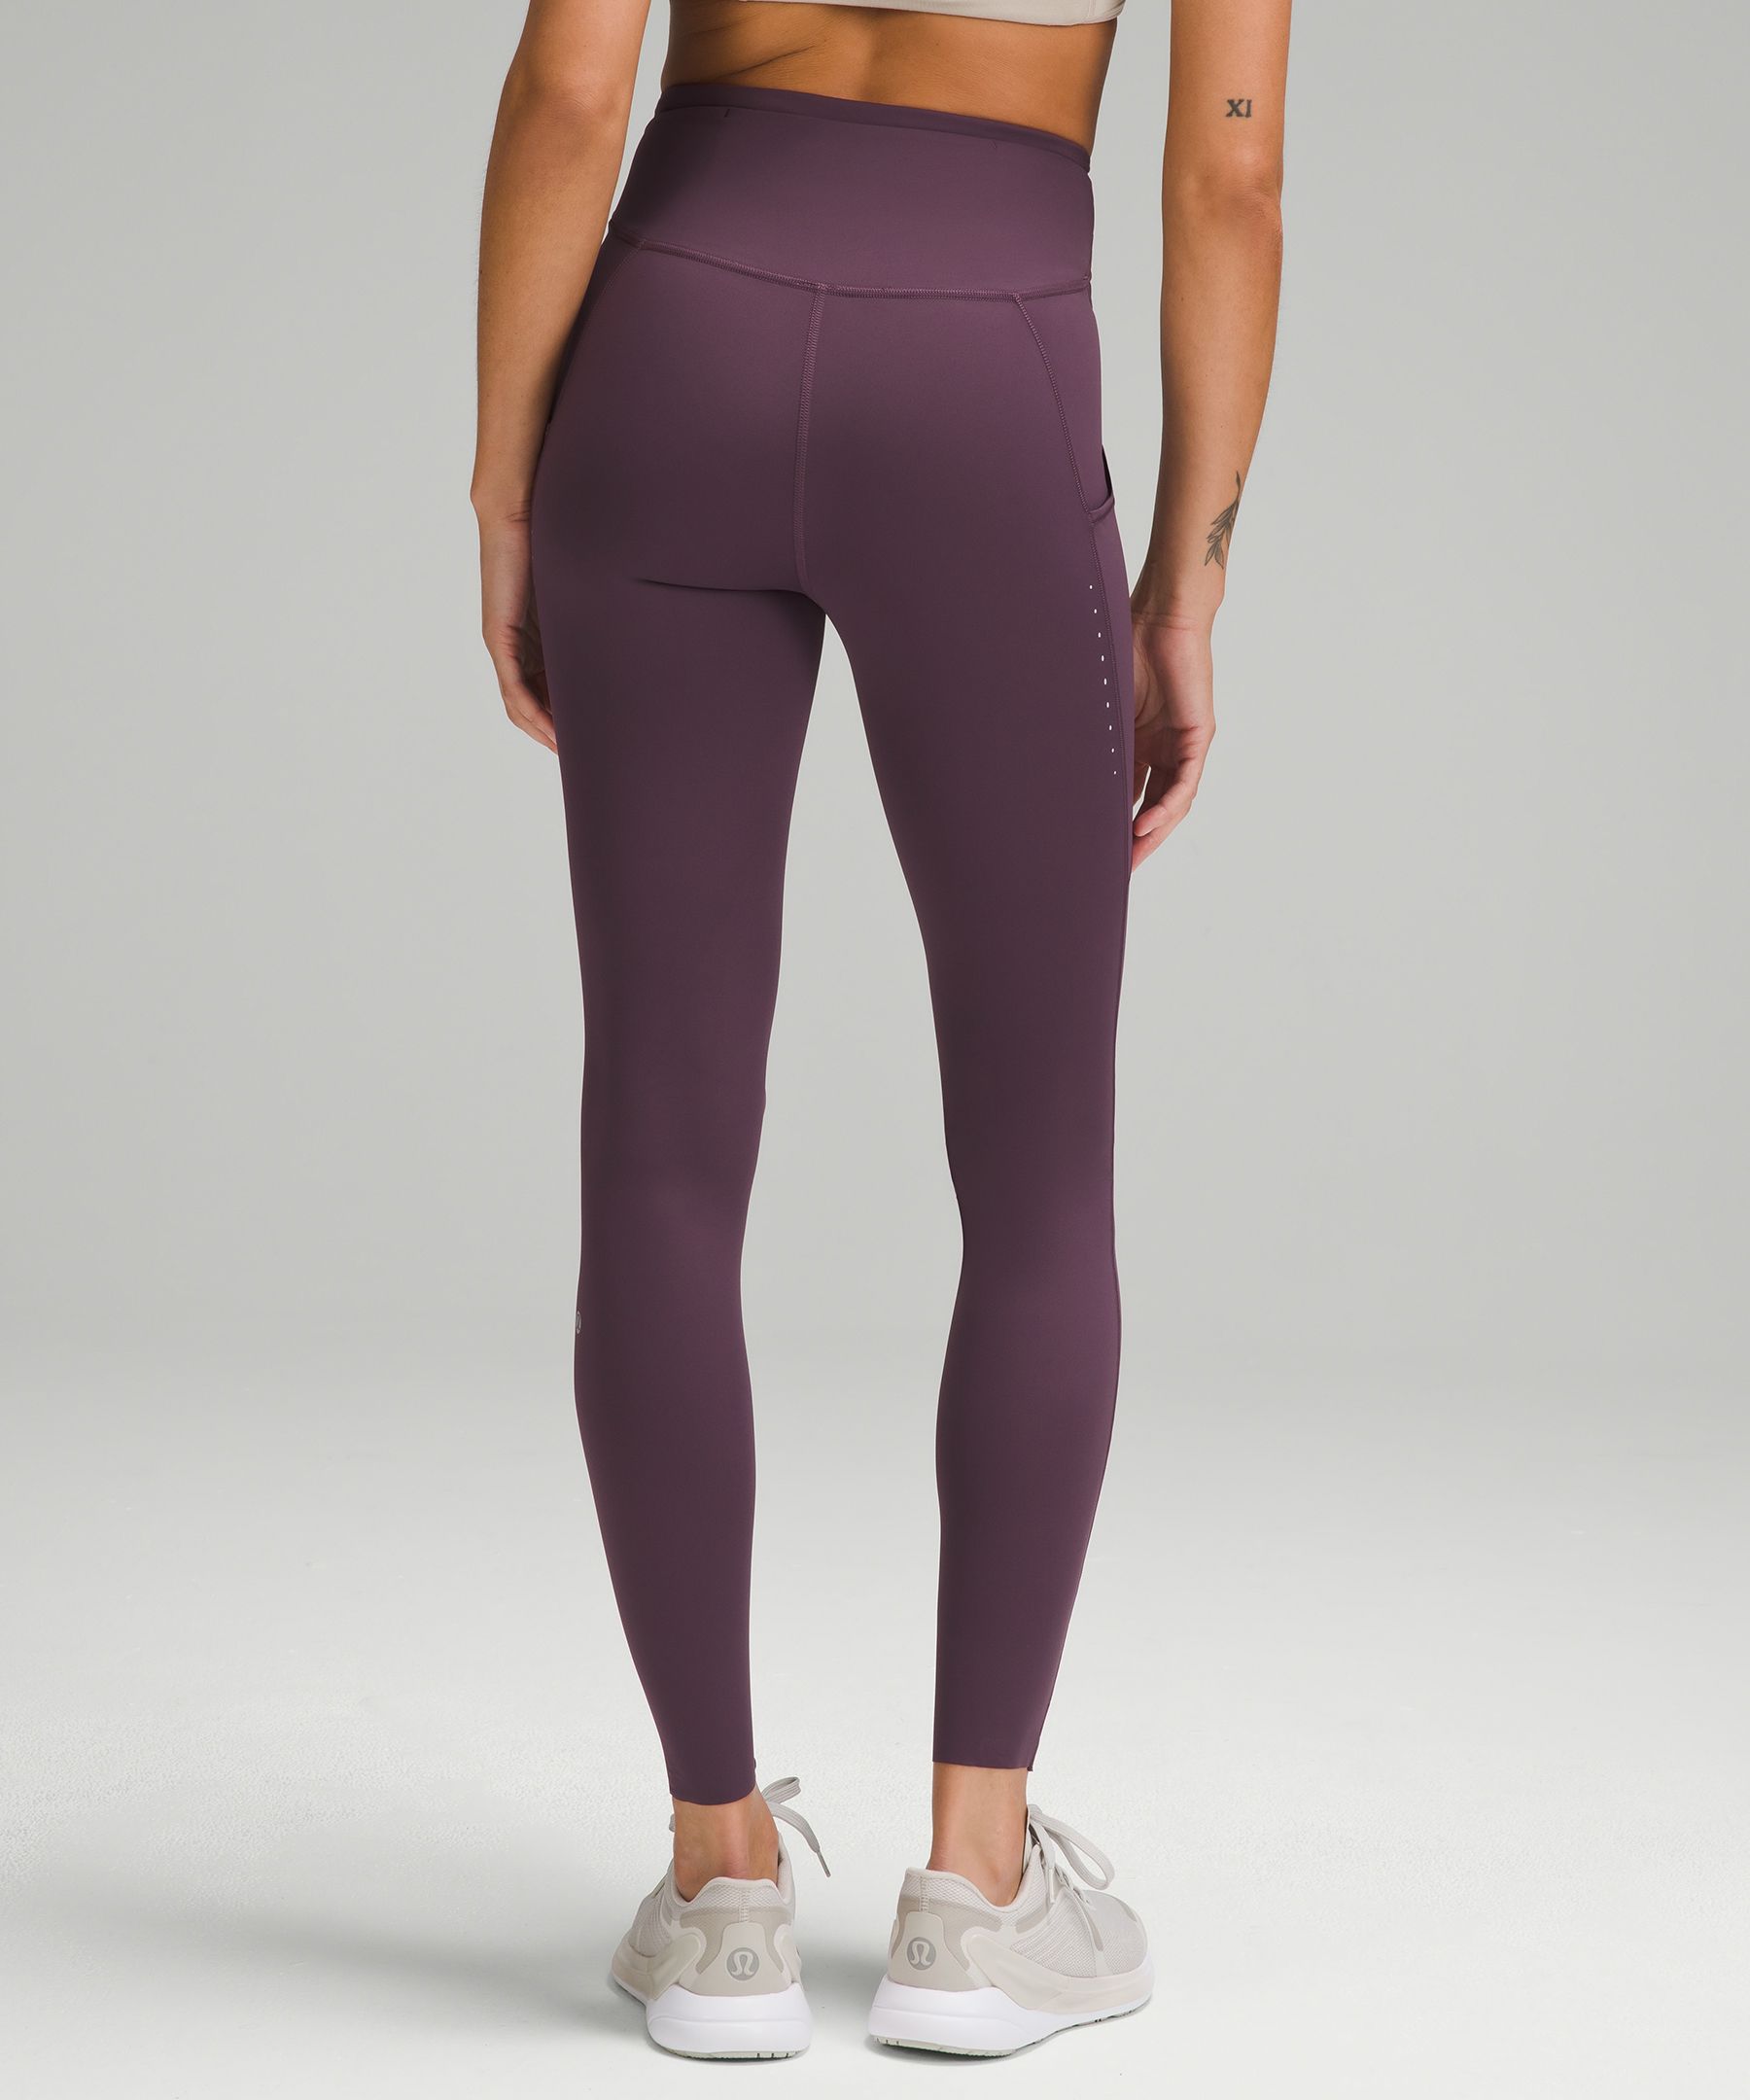 Lululemon Base Pace High-Rise Tight 23 *Ribbed Nulux - Everglade